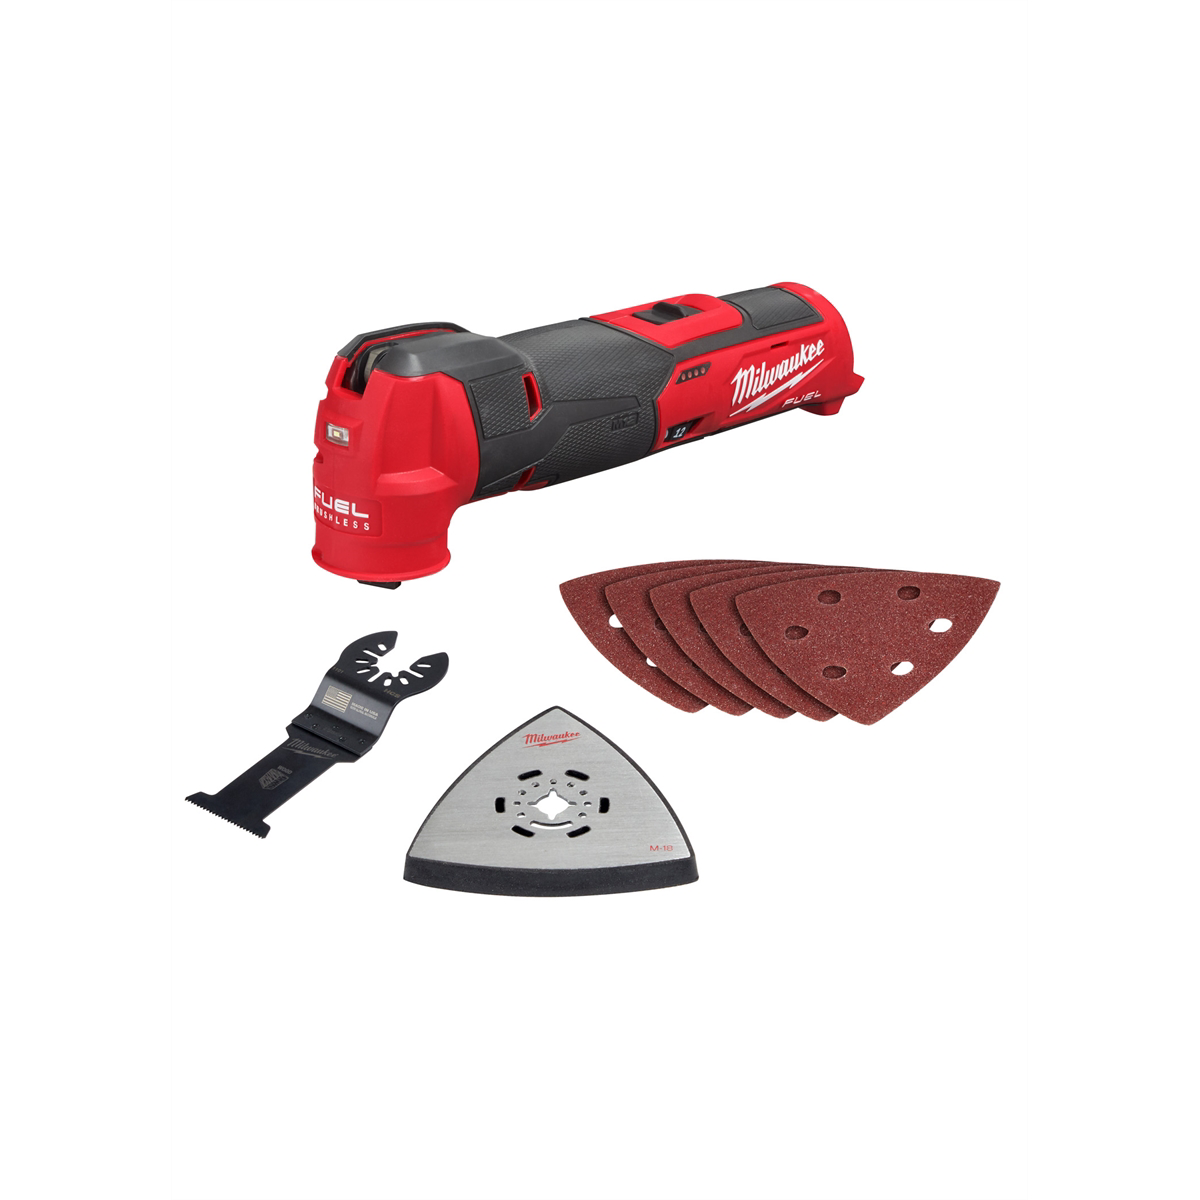 M12 FUEL Oscillating Multi-Tool (Tool Only)